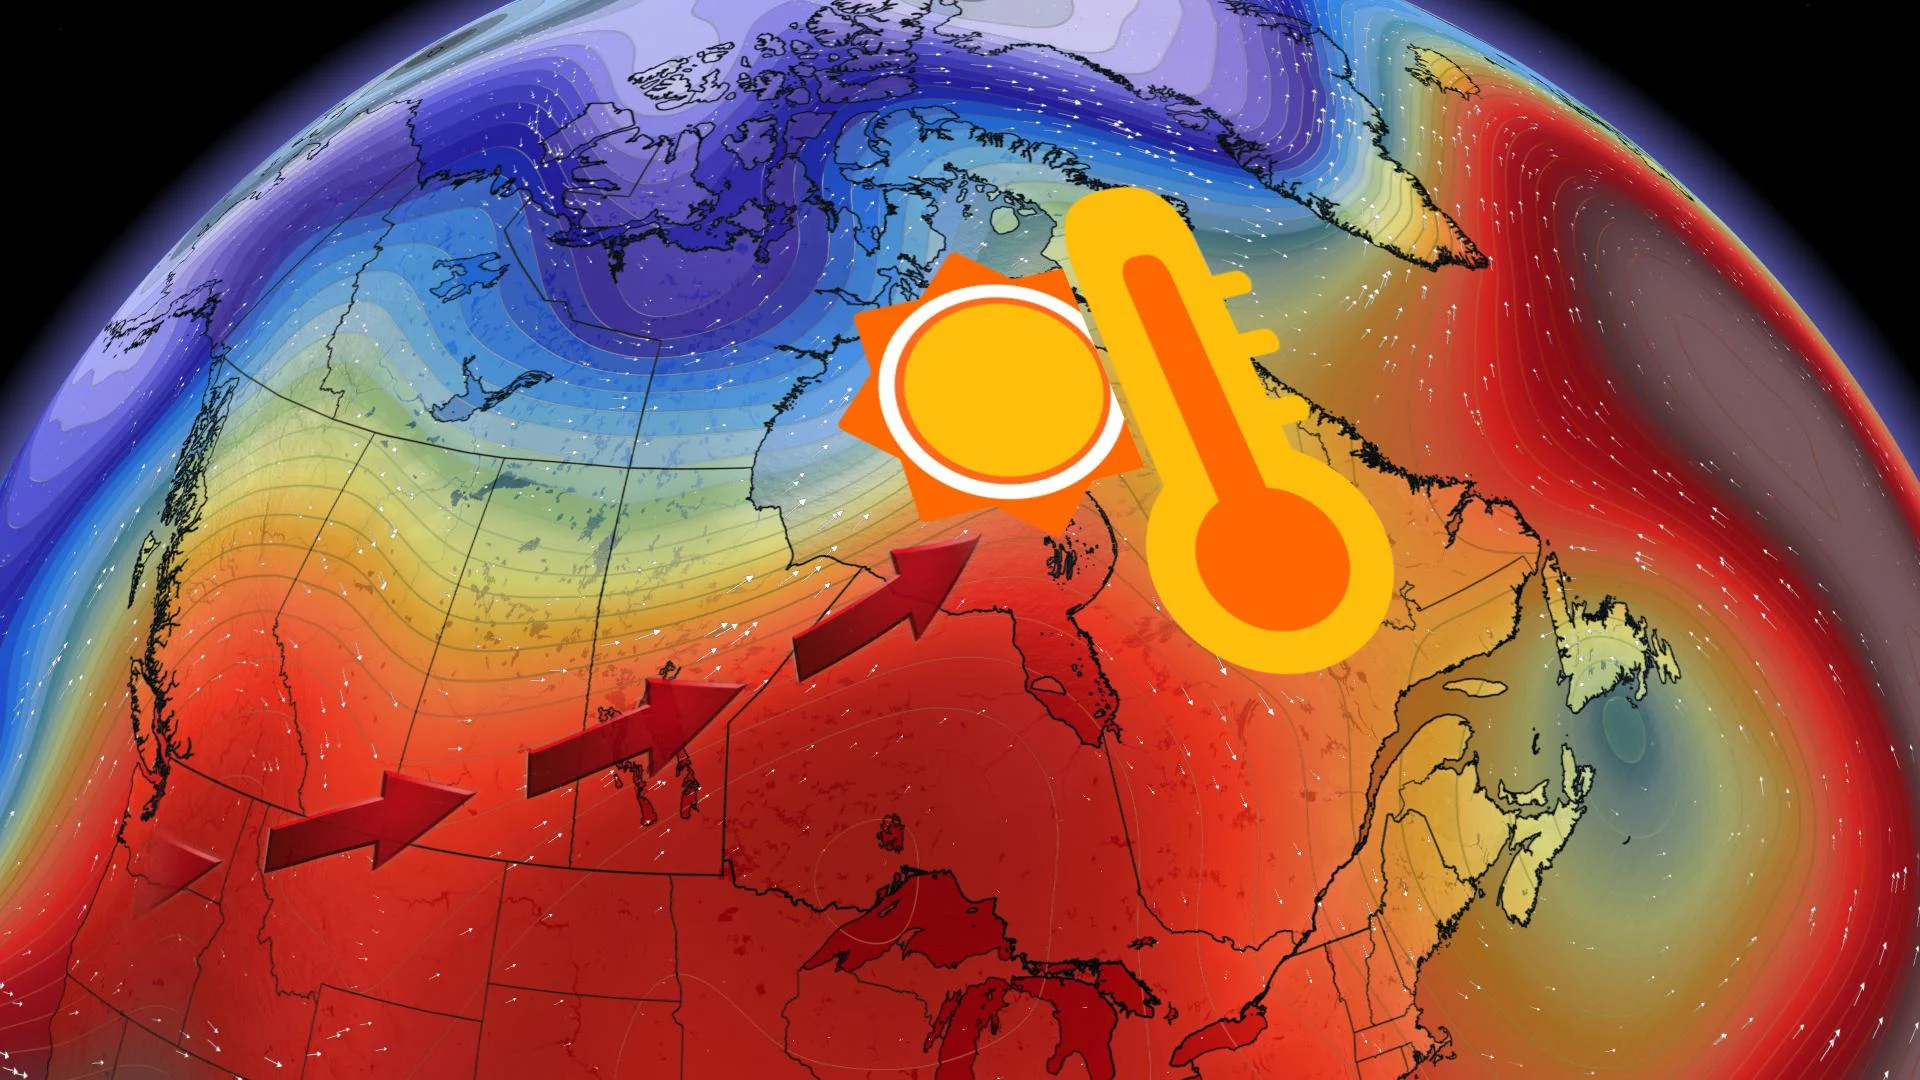 Nunavut set for a 35 degree warm-up after dangerous -60 wind chills